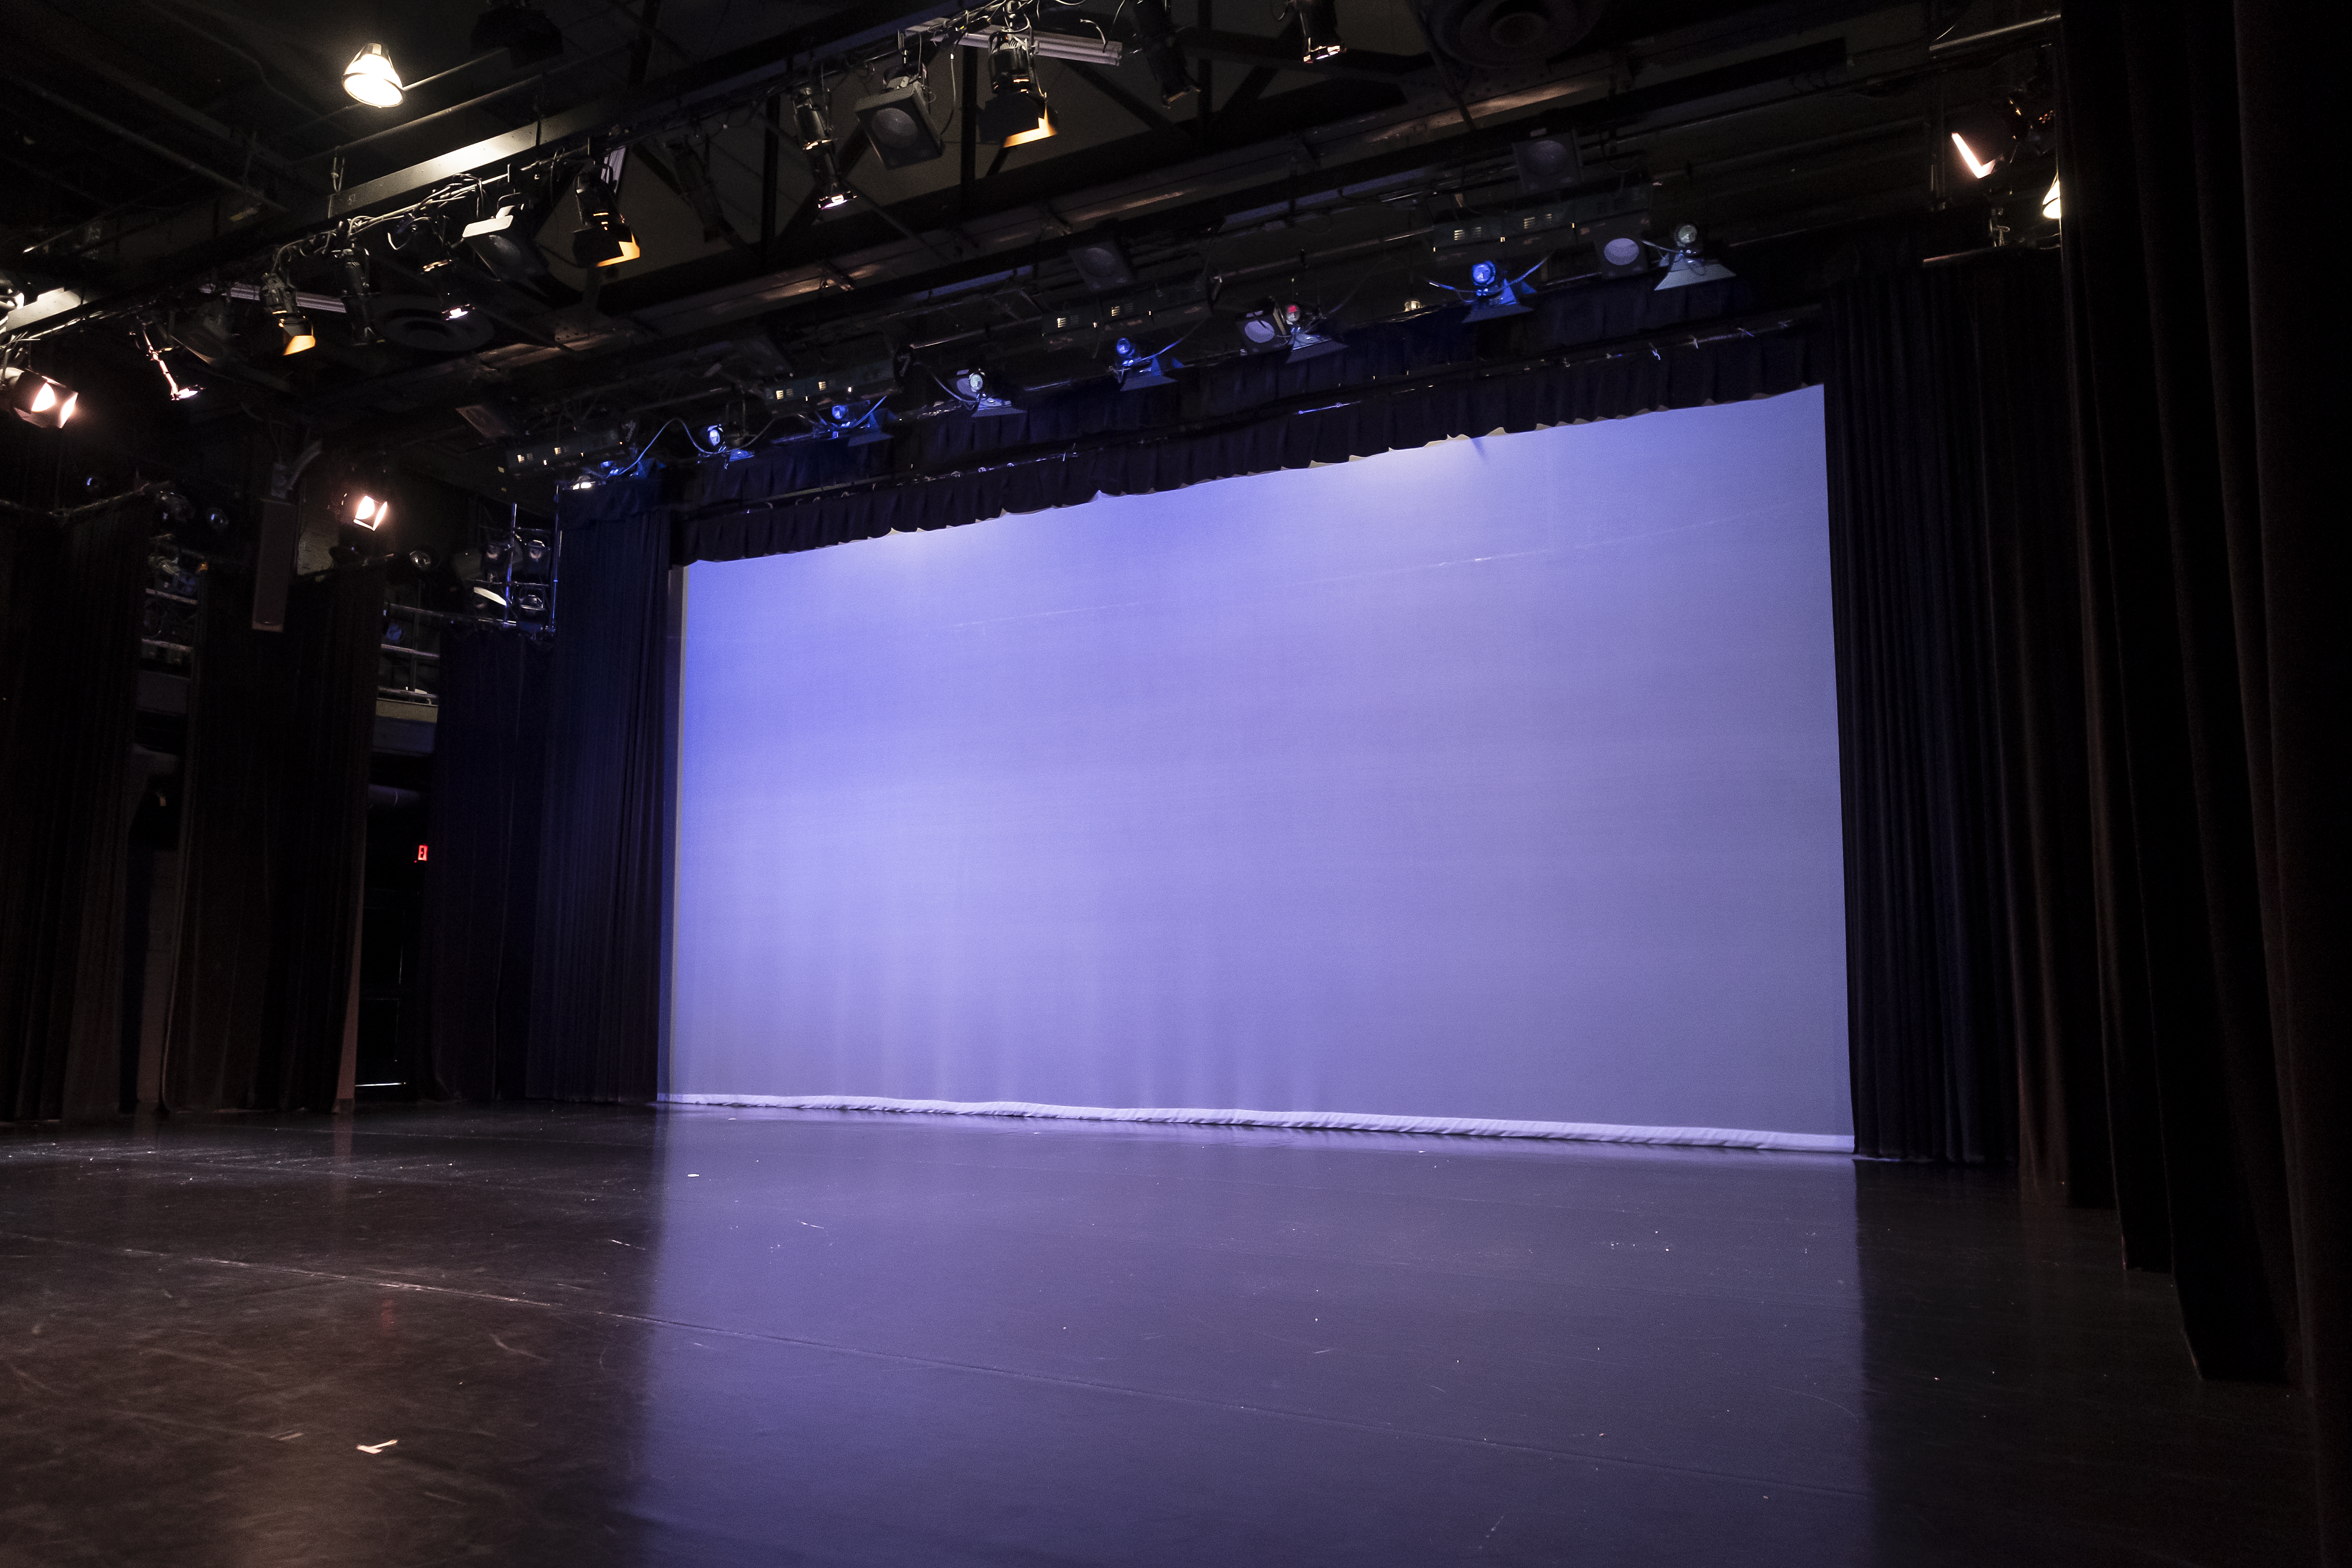 Stage in black box theater, screen in back lit with purple lights 